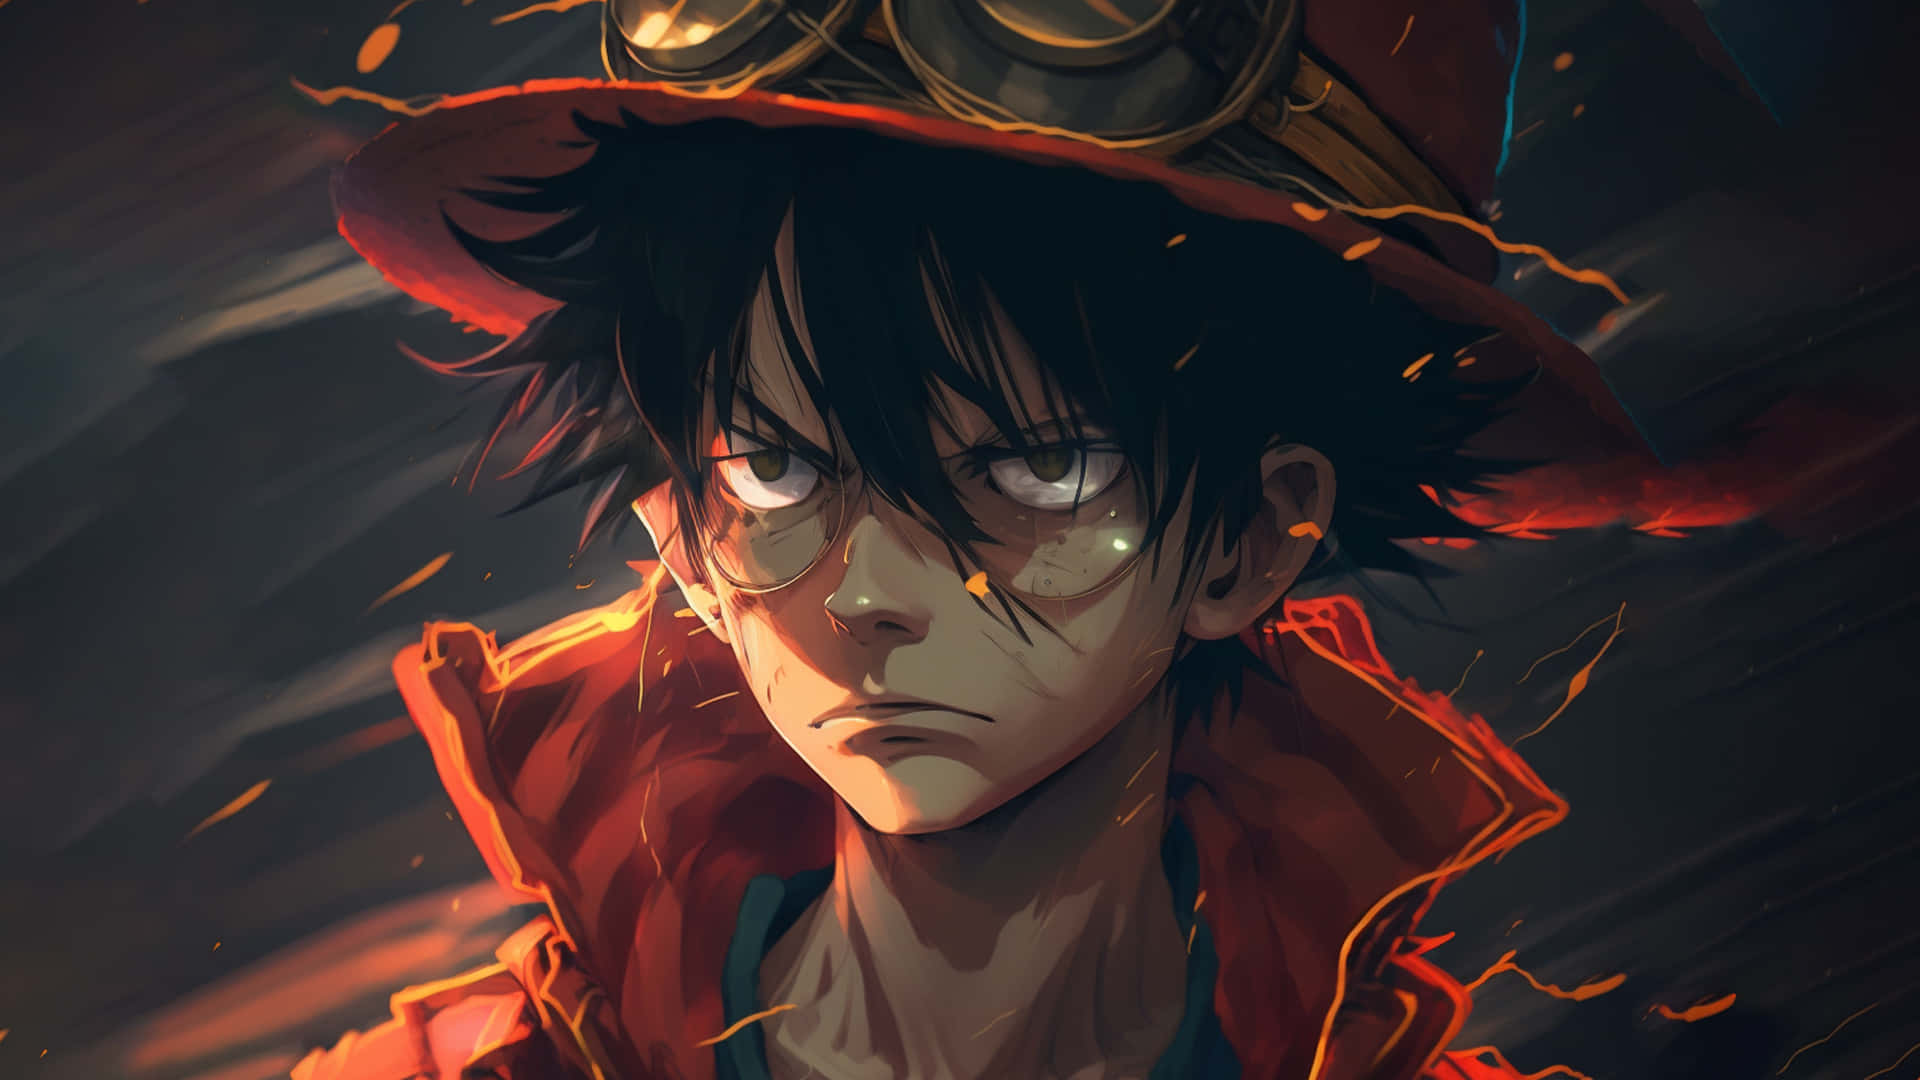 Luffy, The Fearless Pirate King